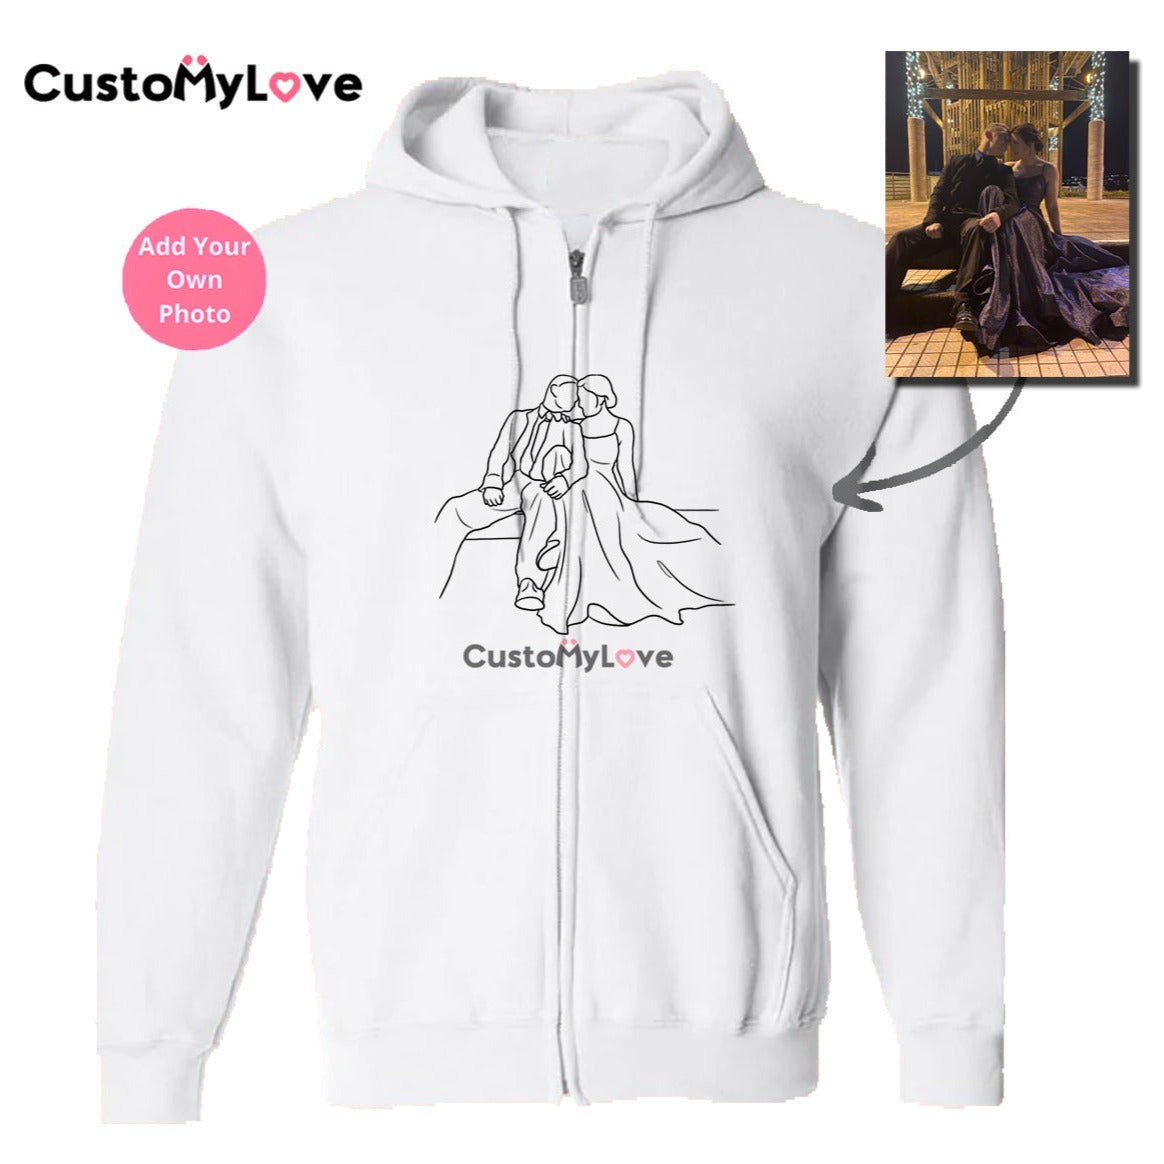 ❤️PERSONALIZED PHOTO LINE DRAWING ZIP-UP HOODIE